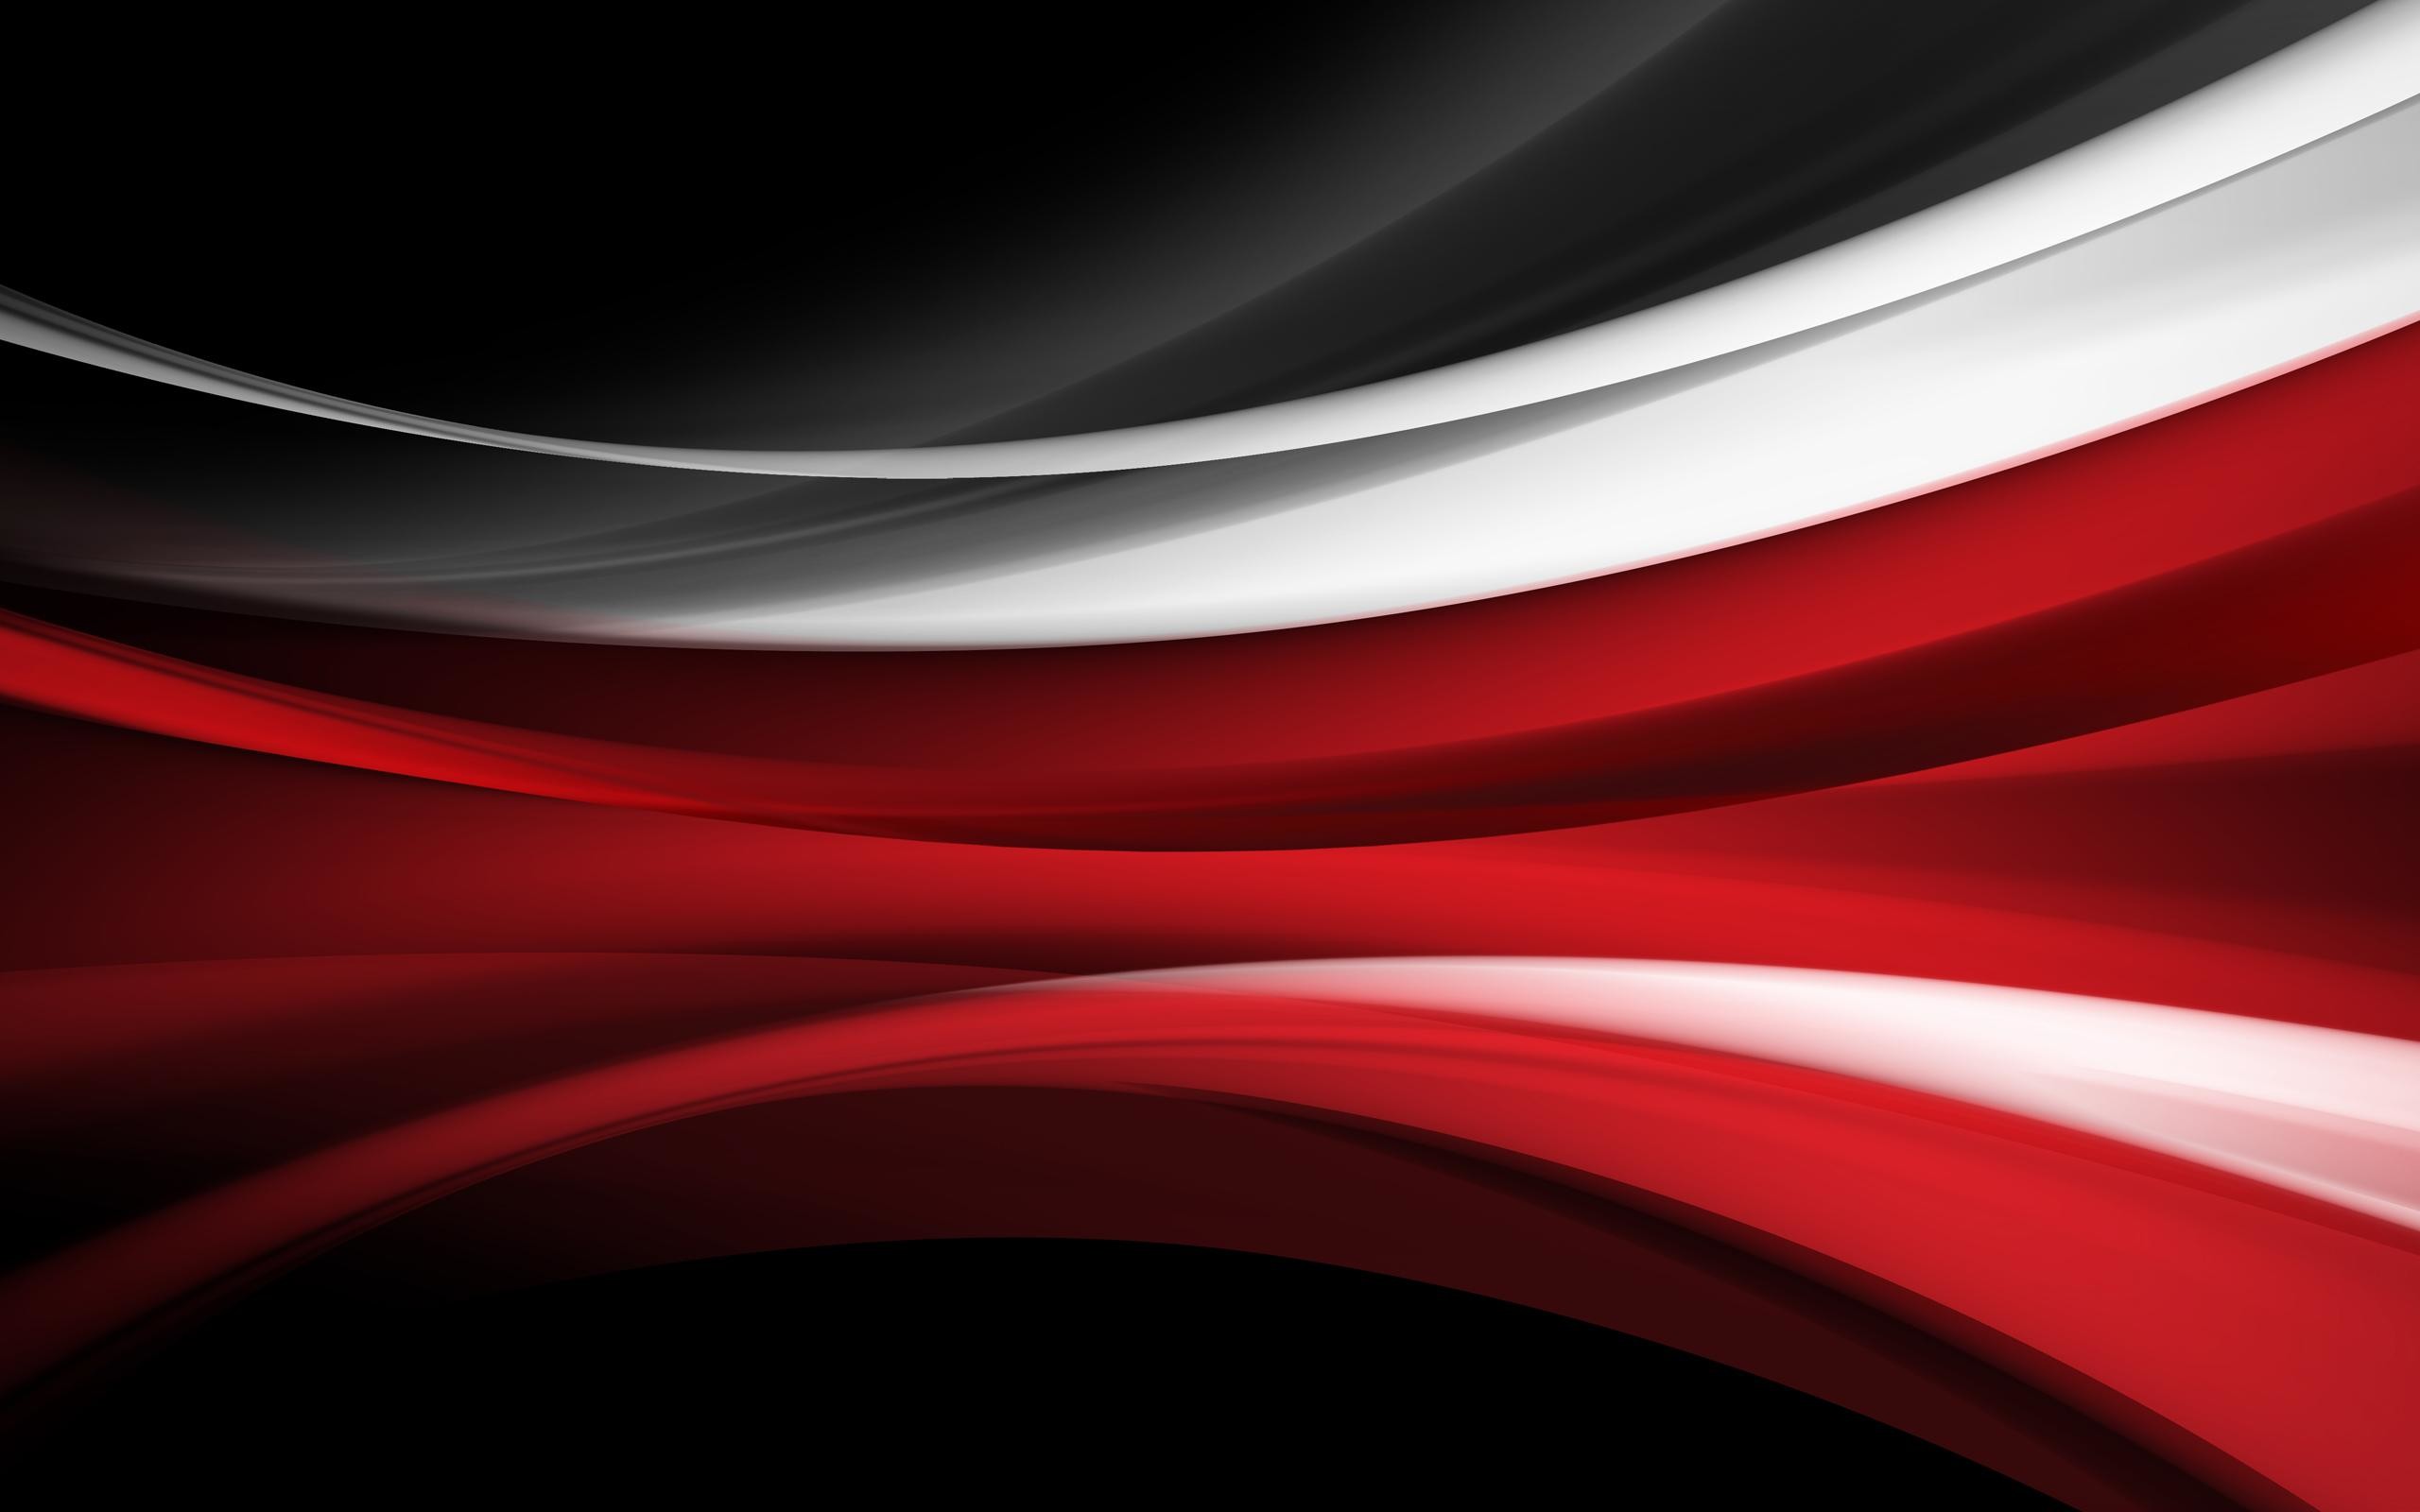 Free HD Black And Red Wallpapers For Desktop.